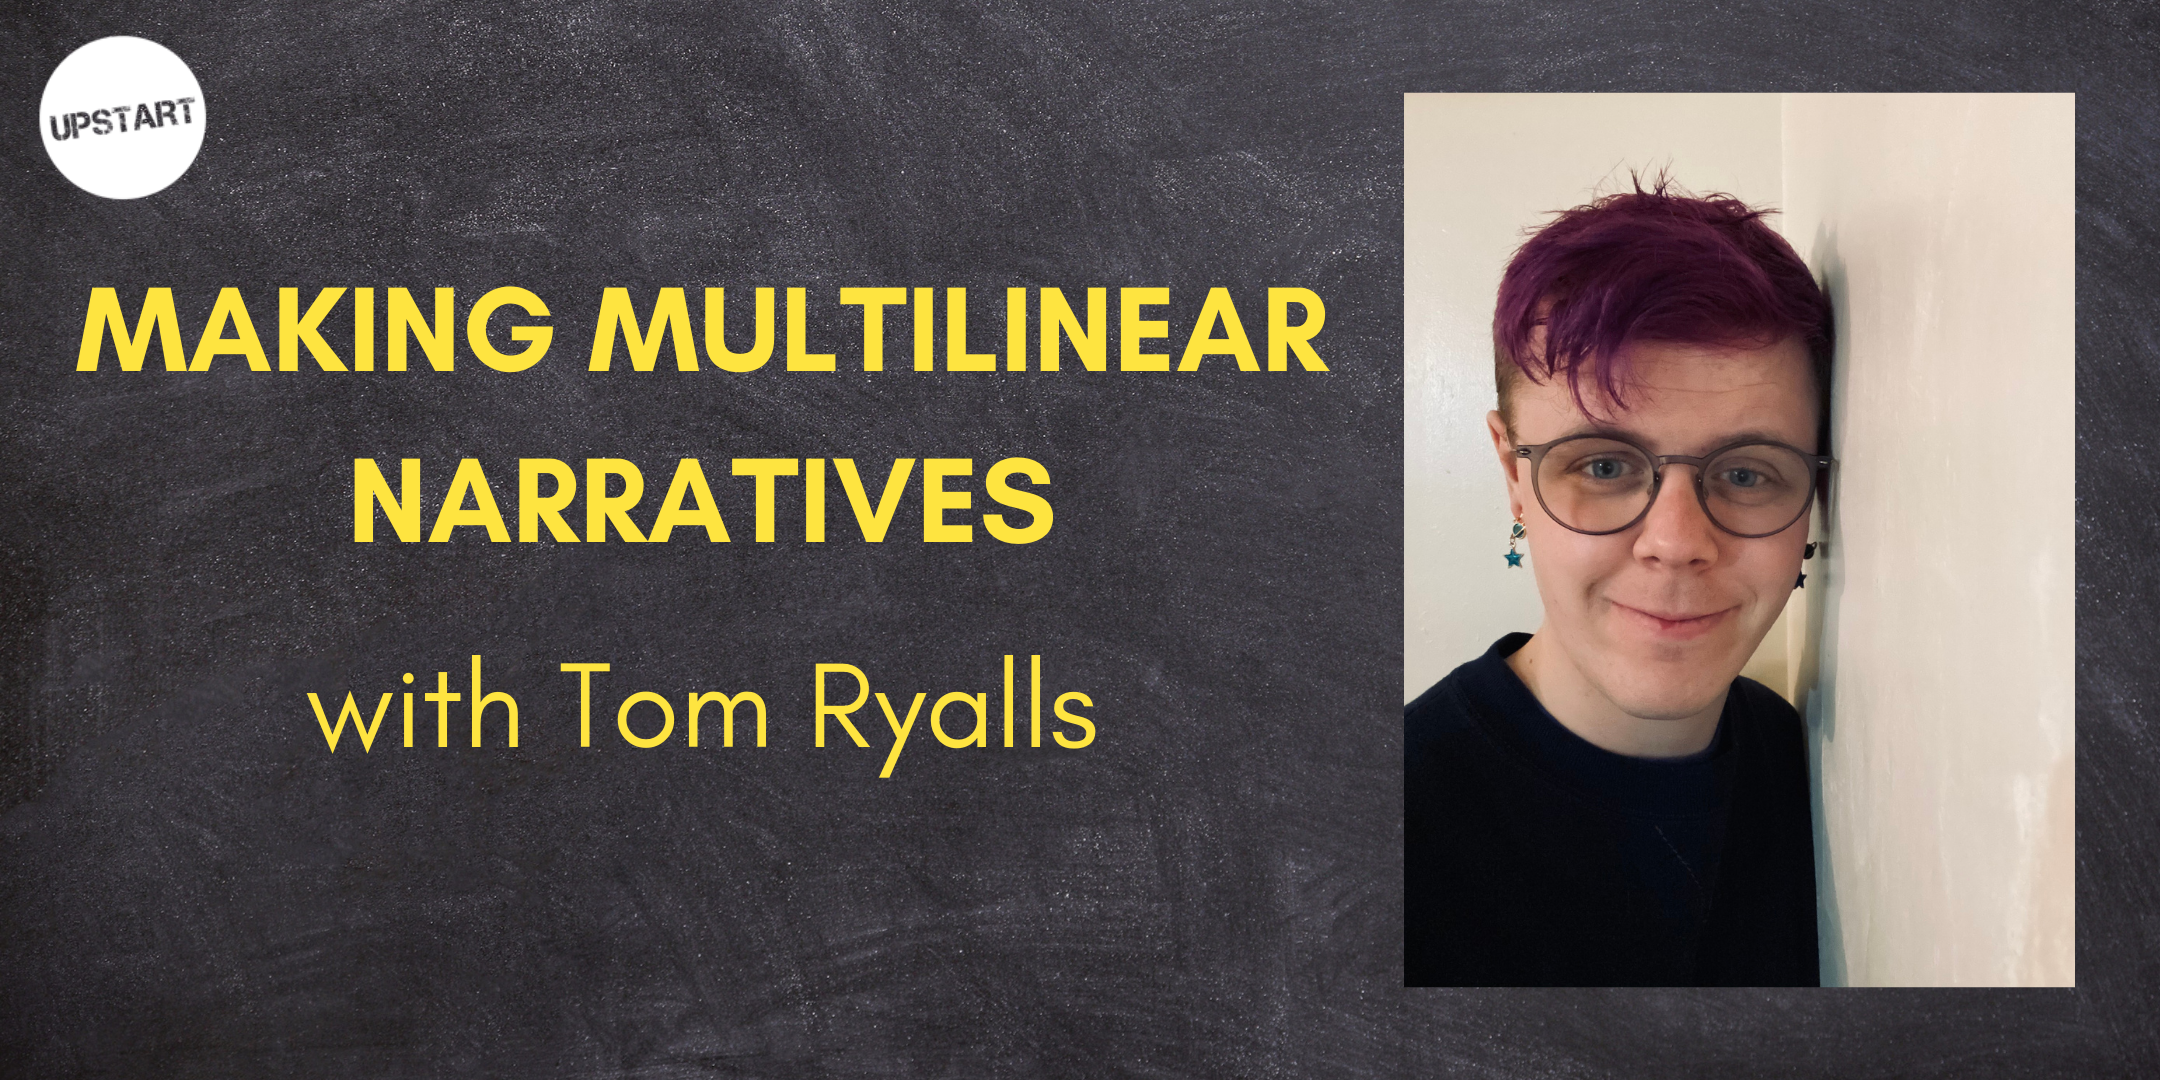 A picture of Tom Ryalls with the title of the workshop: Making Multilinear Narratives